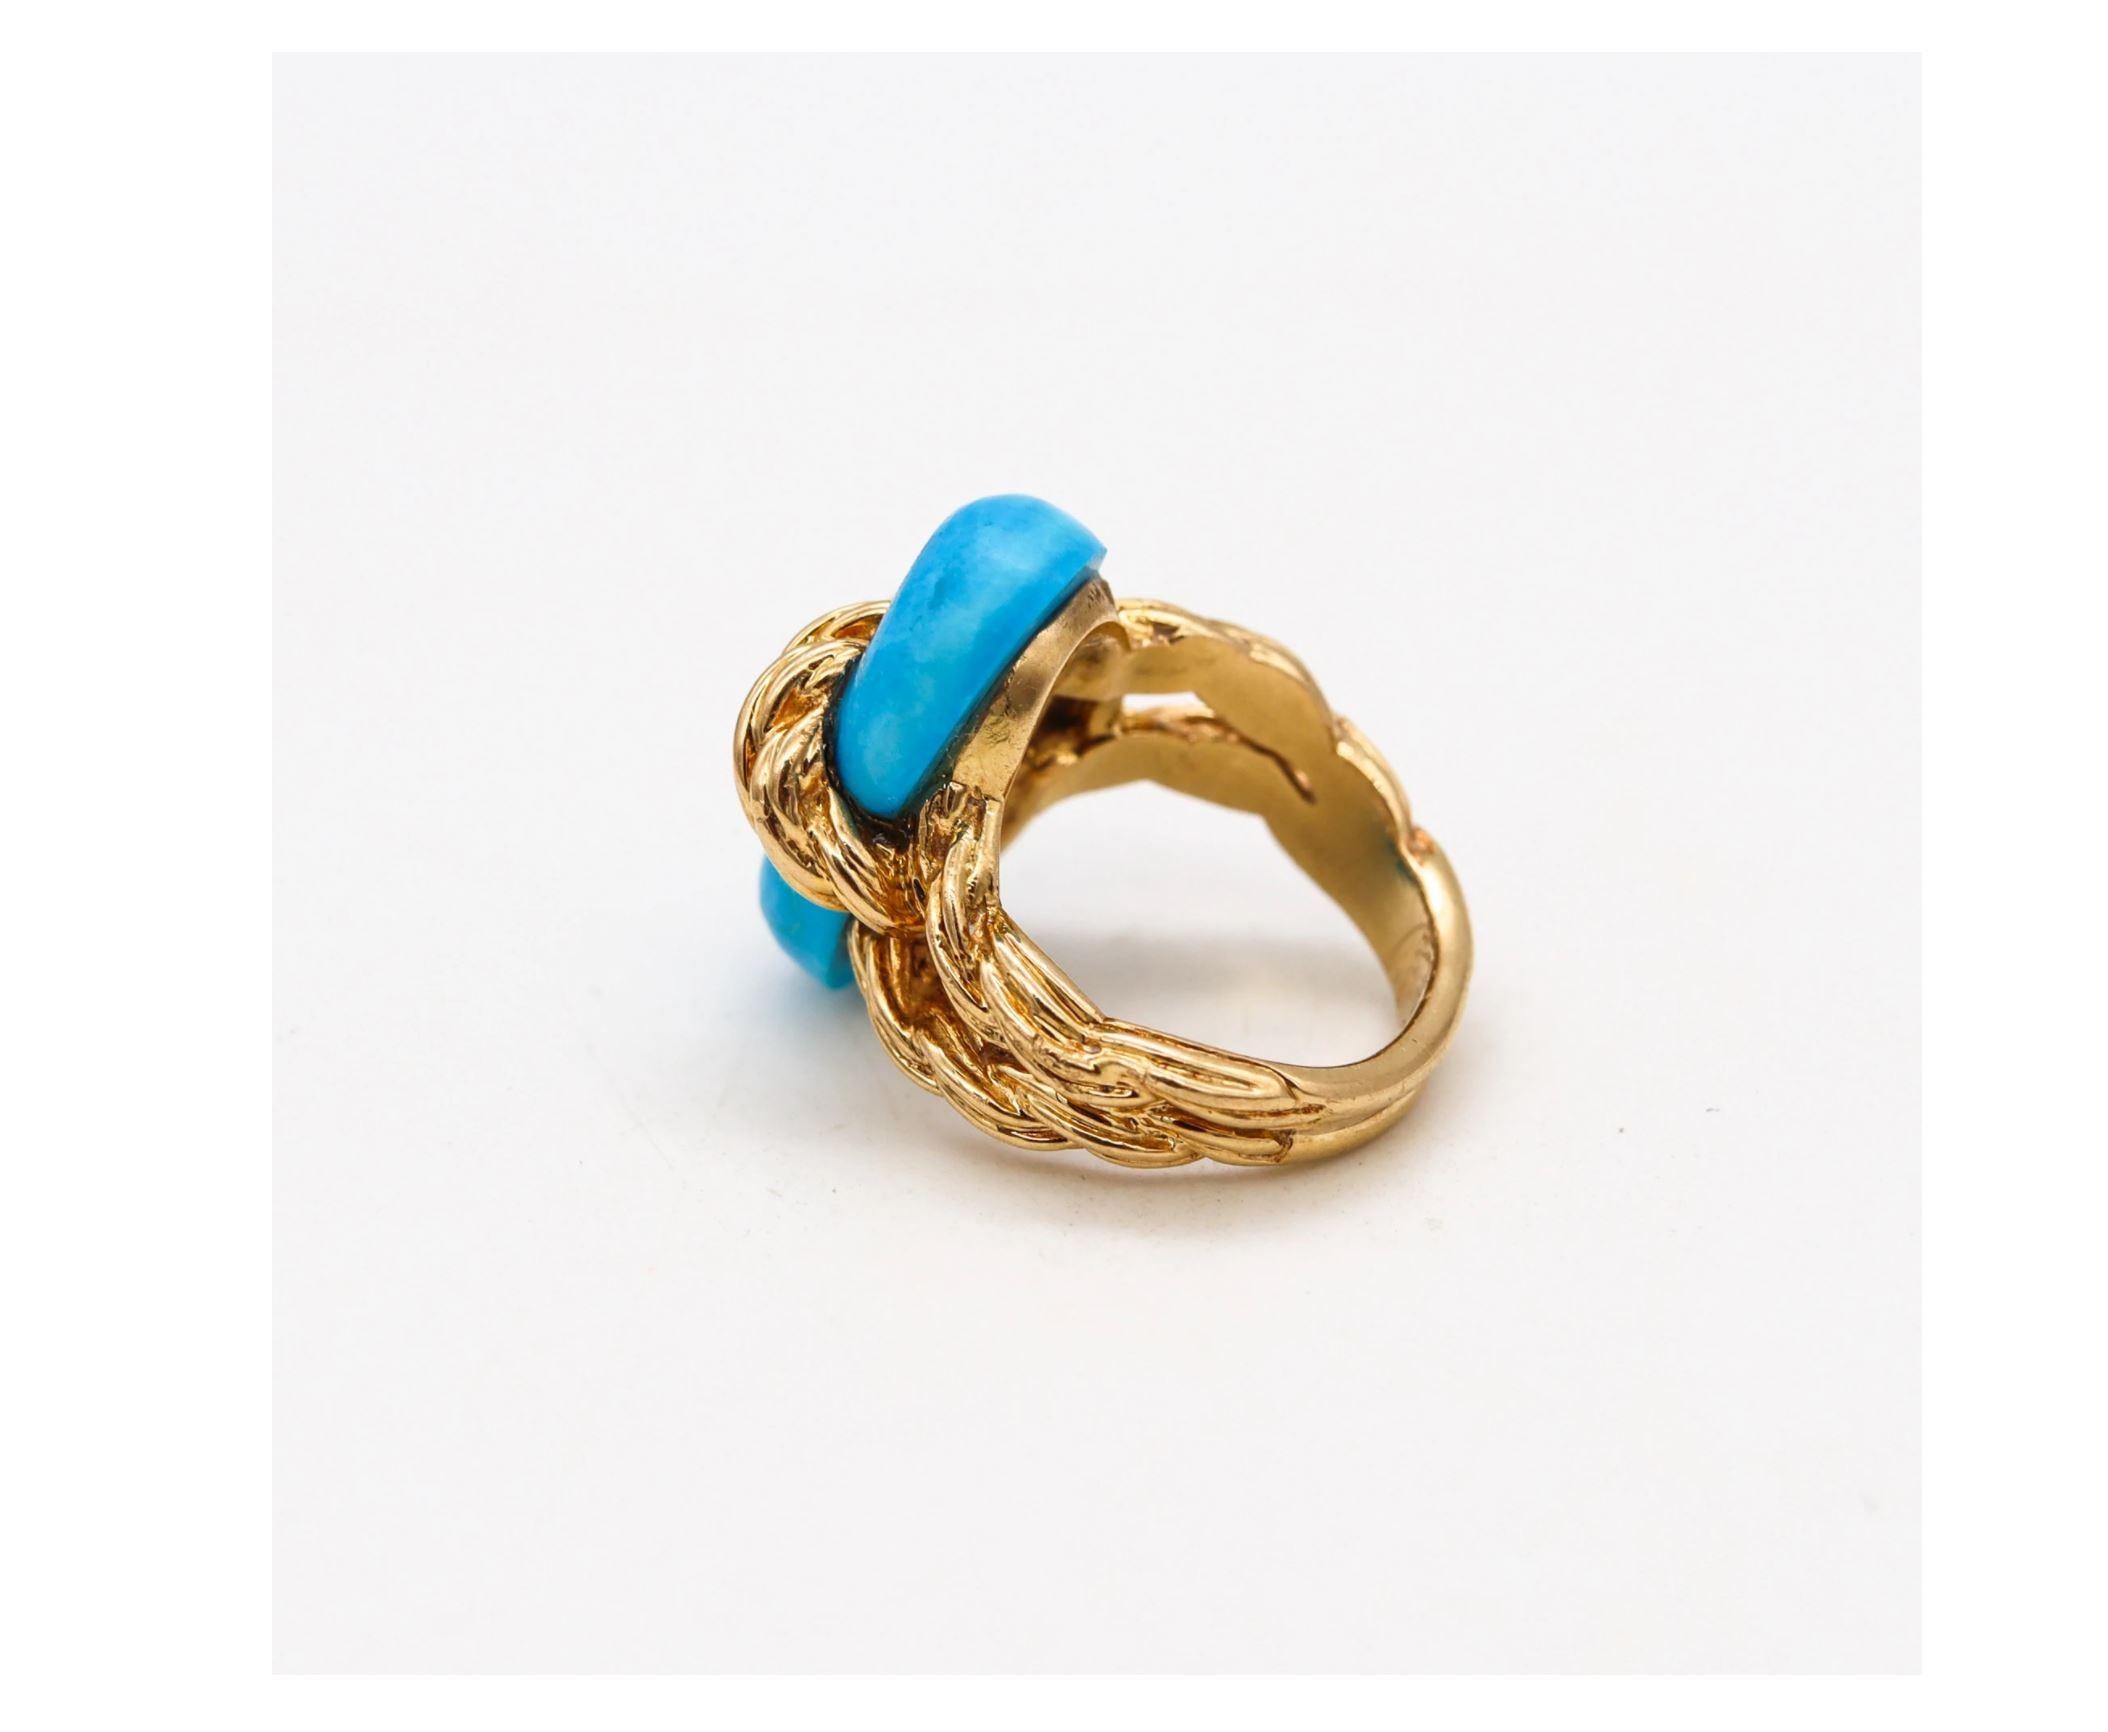 Modern Van Cleef & Arpels 1970 Paris Twisted Ropes Cocktail Ring 18kt Gold Turquoise